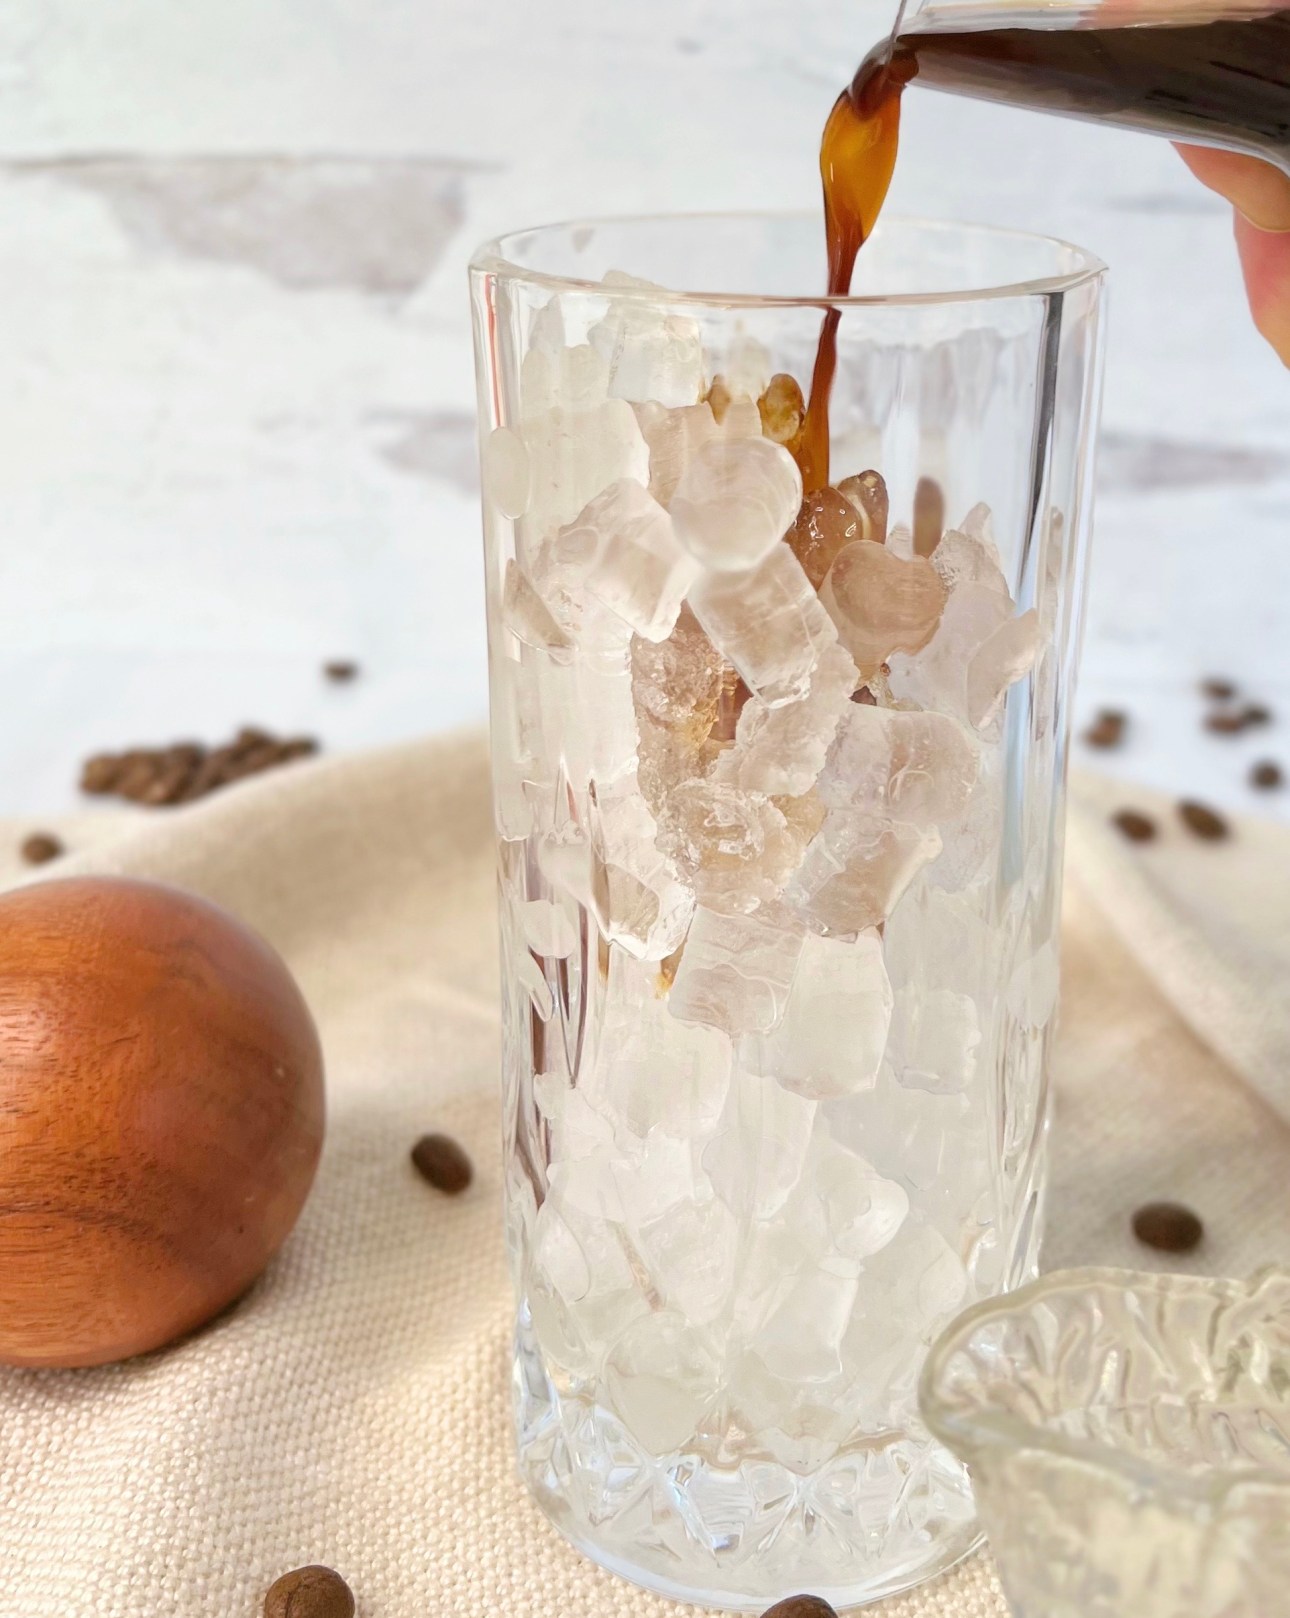 Pouring Coffee Over Ice